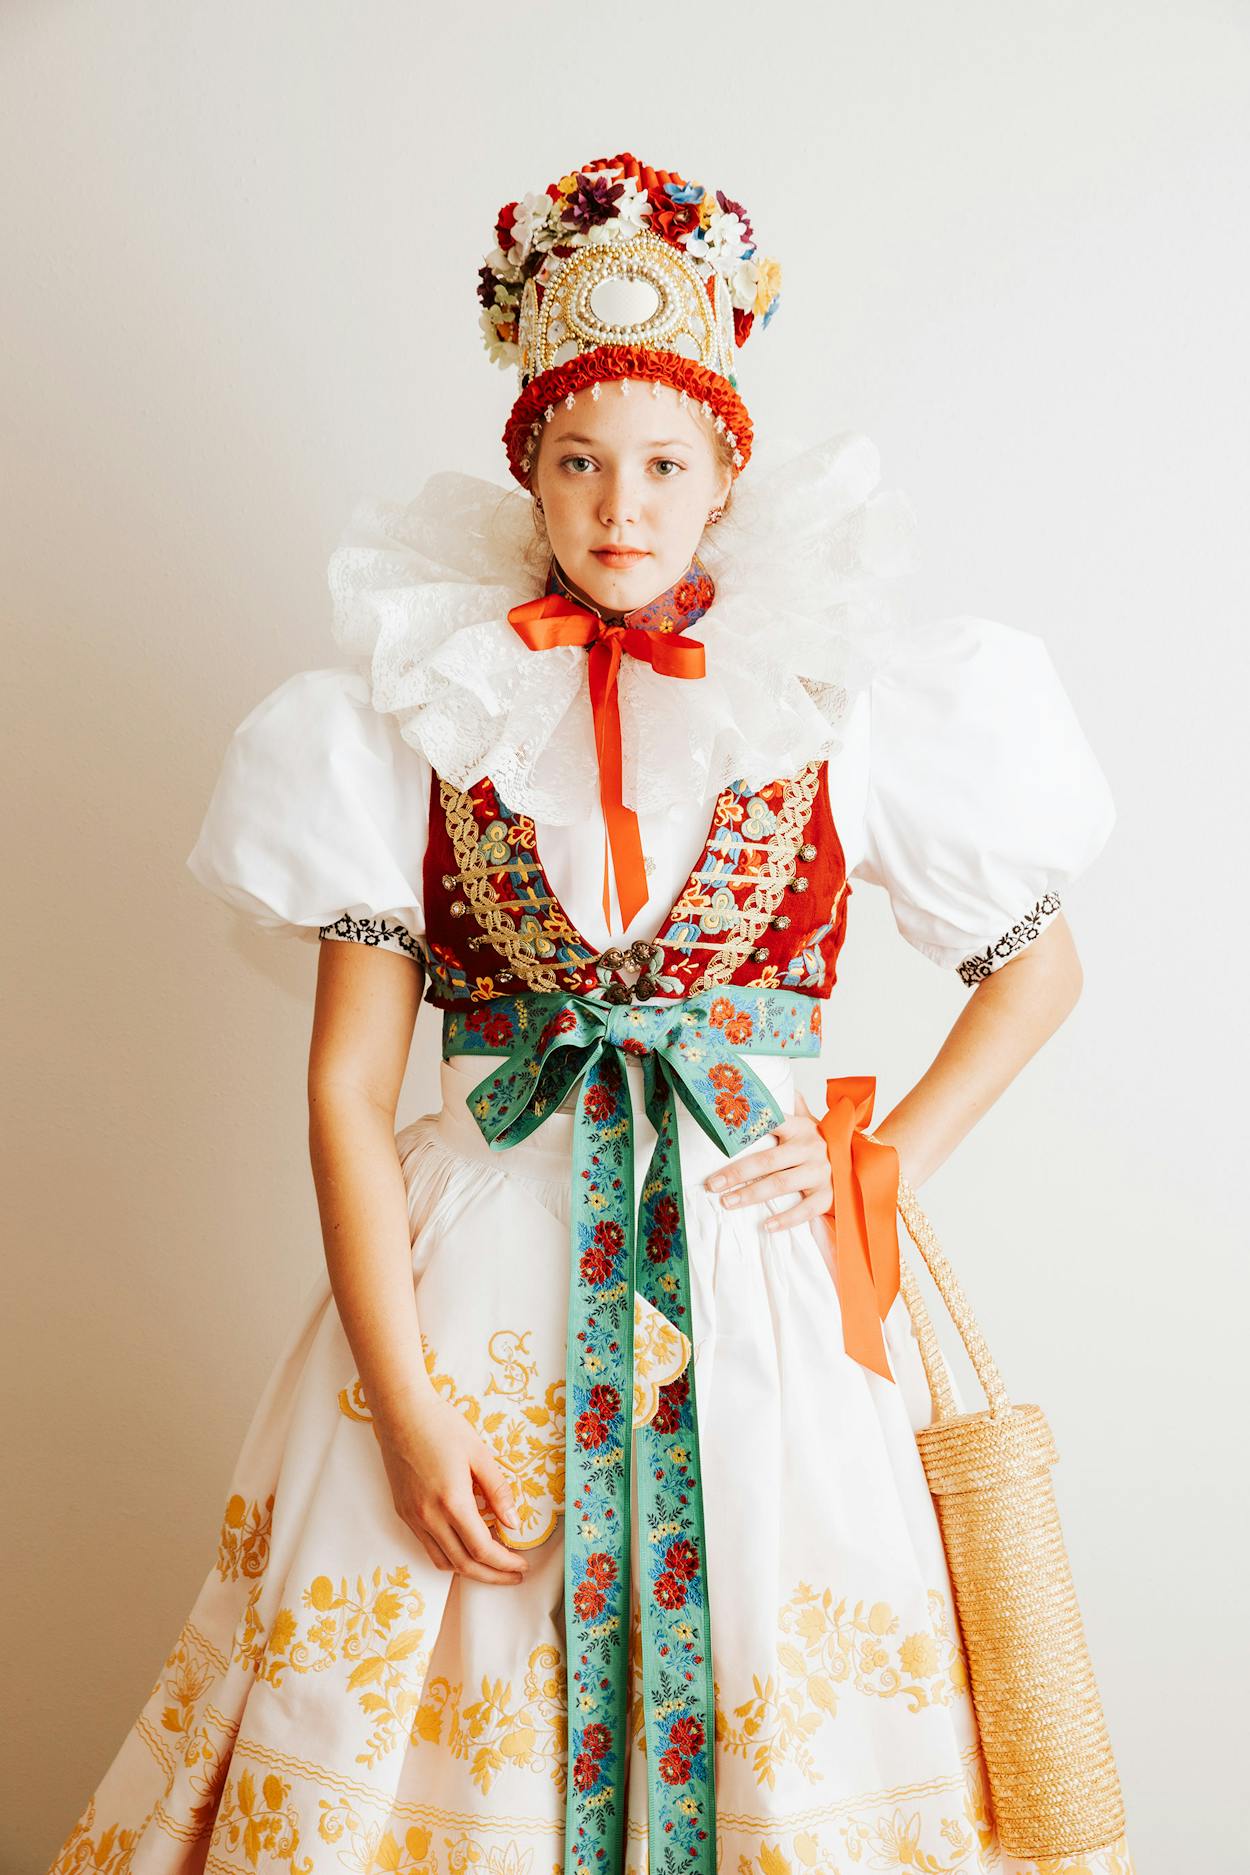 The Traditional Czech Gowns Capable of Withstanding Texas Heat